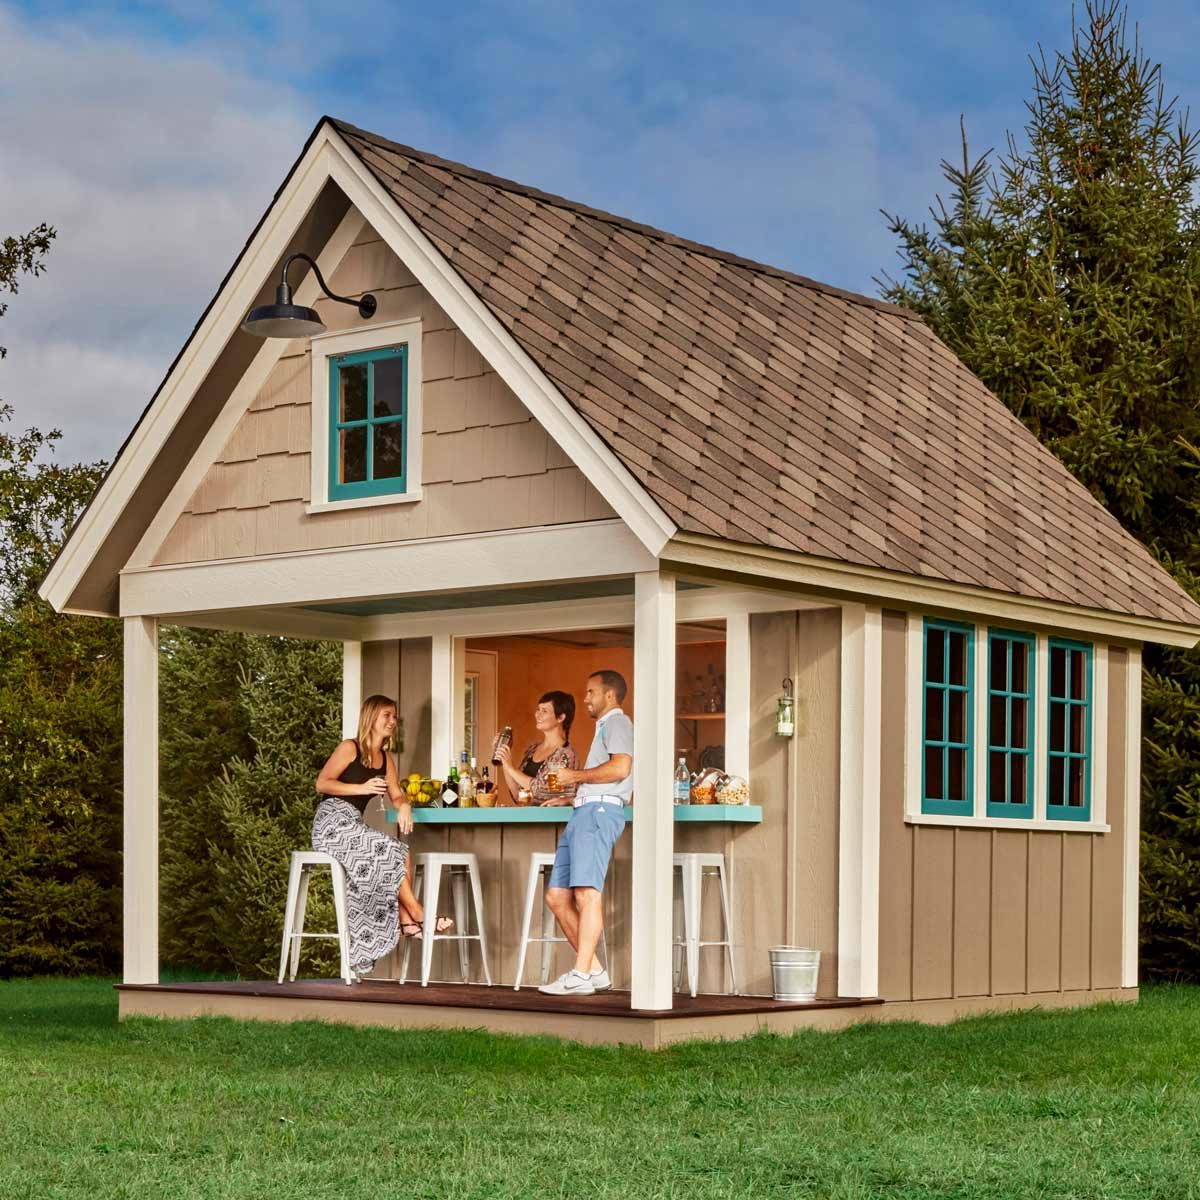 How To Build a Storage Shed With an Amazing Backyard Bar